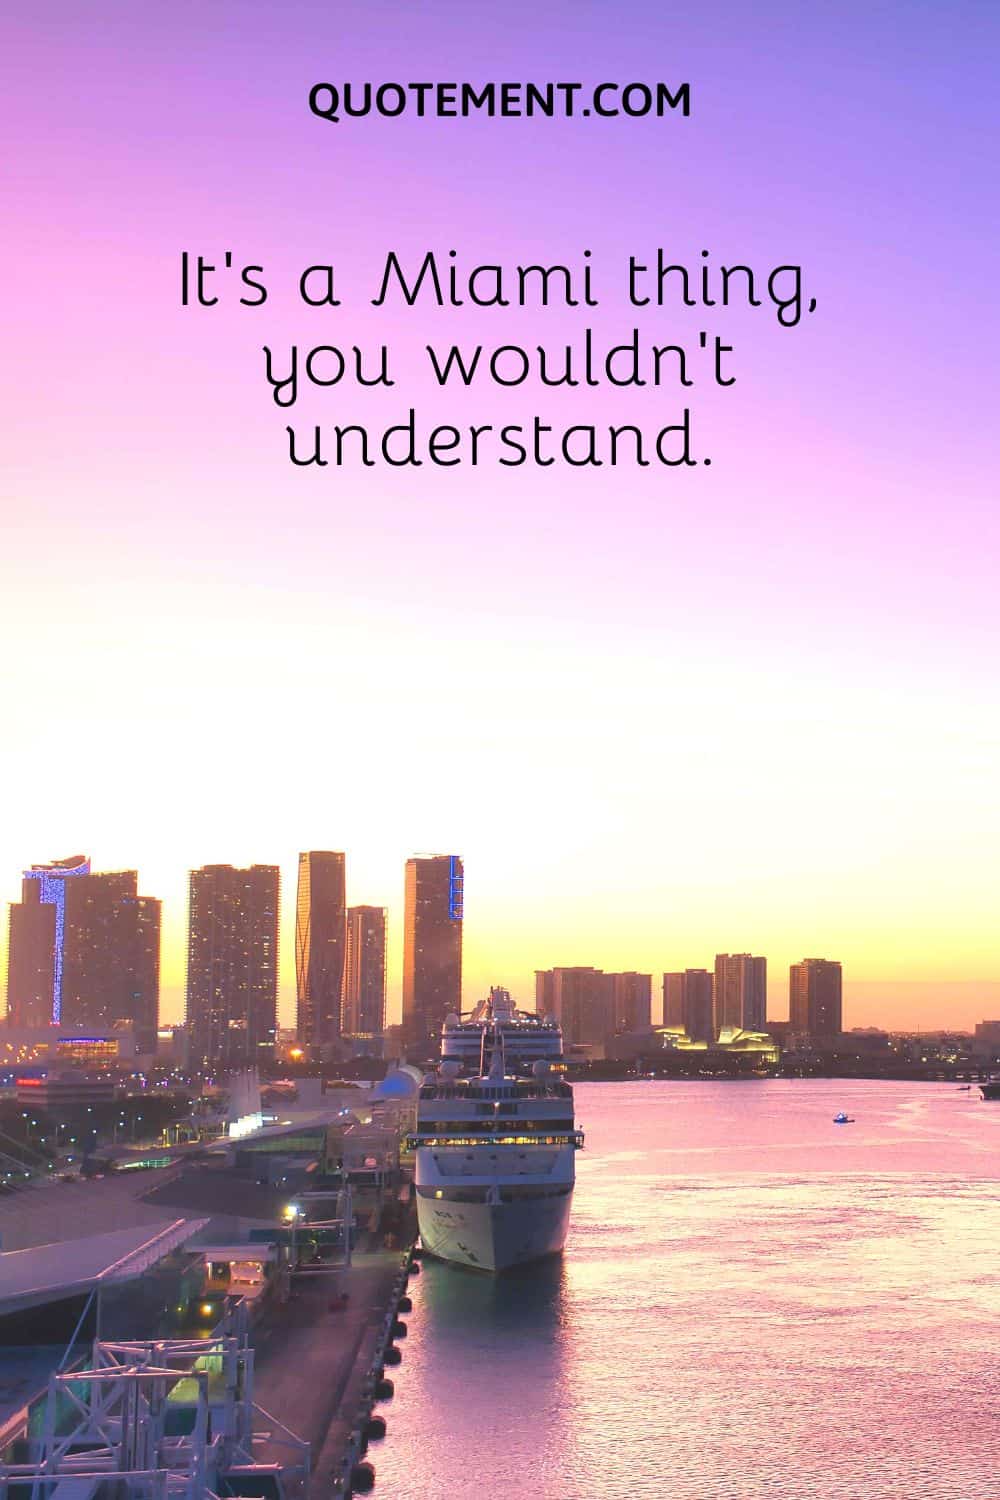 It’s a Miami thing, you wouldn’t understand